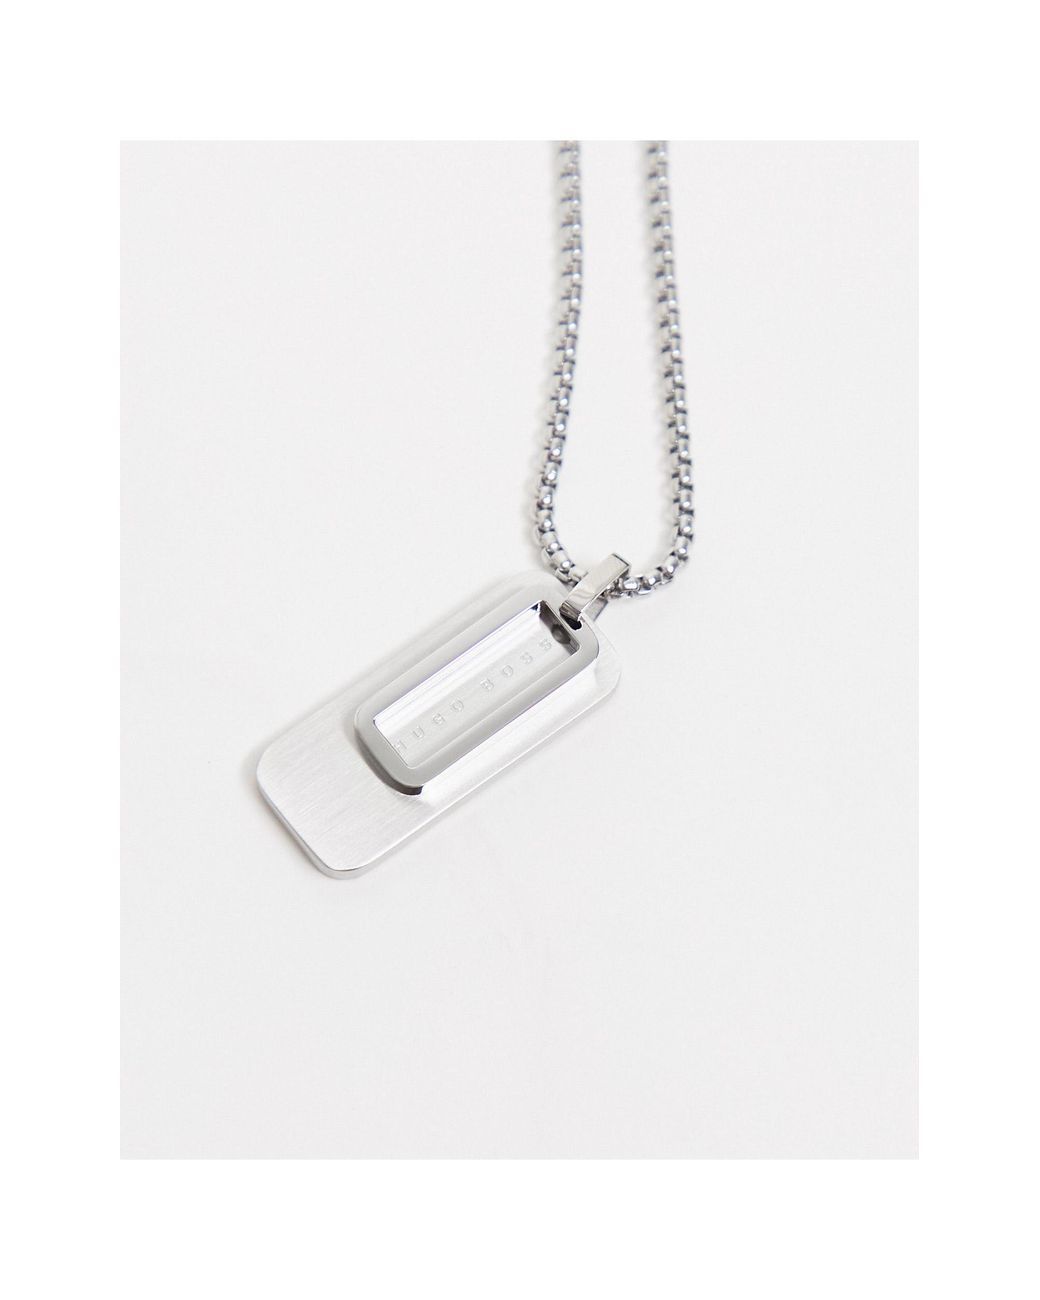 BOSS ID Stainless Steel & Black Silicone Necklace 1580050 | Goldsmiths